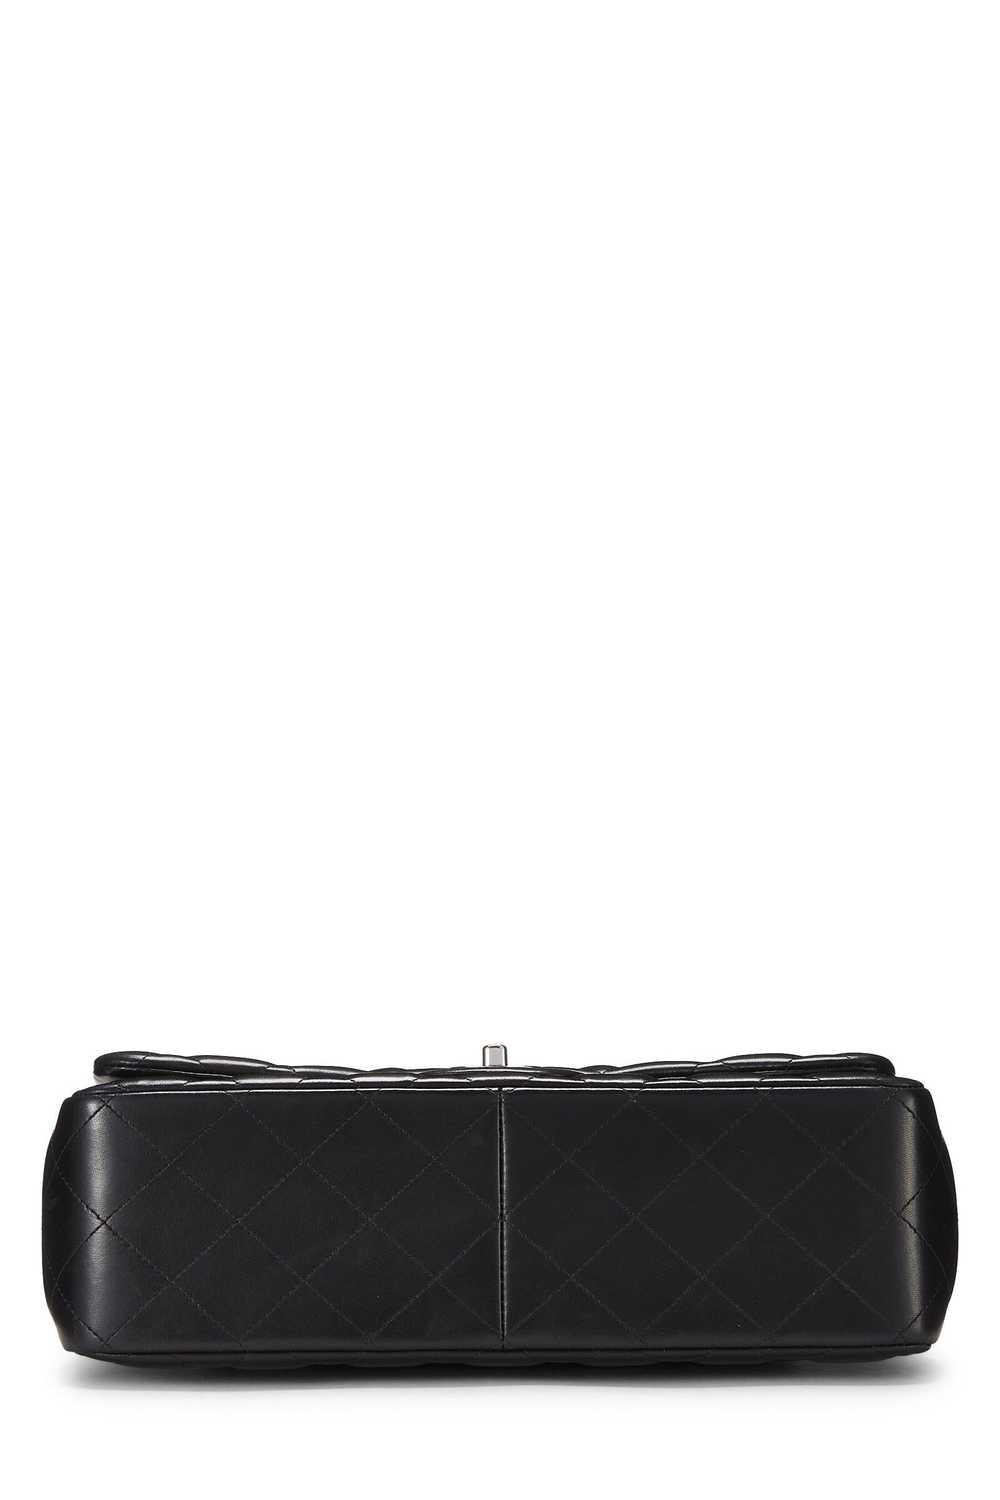 Black Quilted Lambskin New Classic Double Flap Ju… - image 5